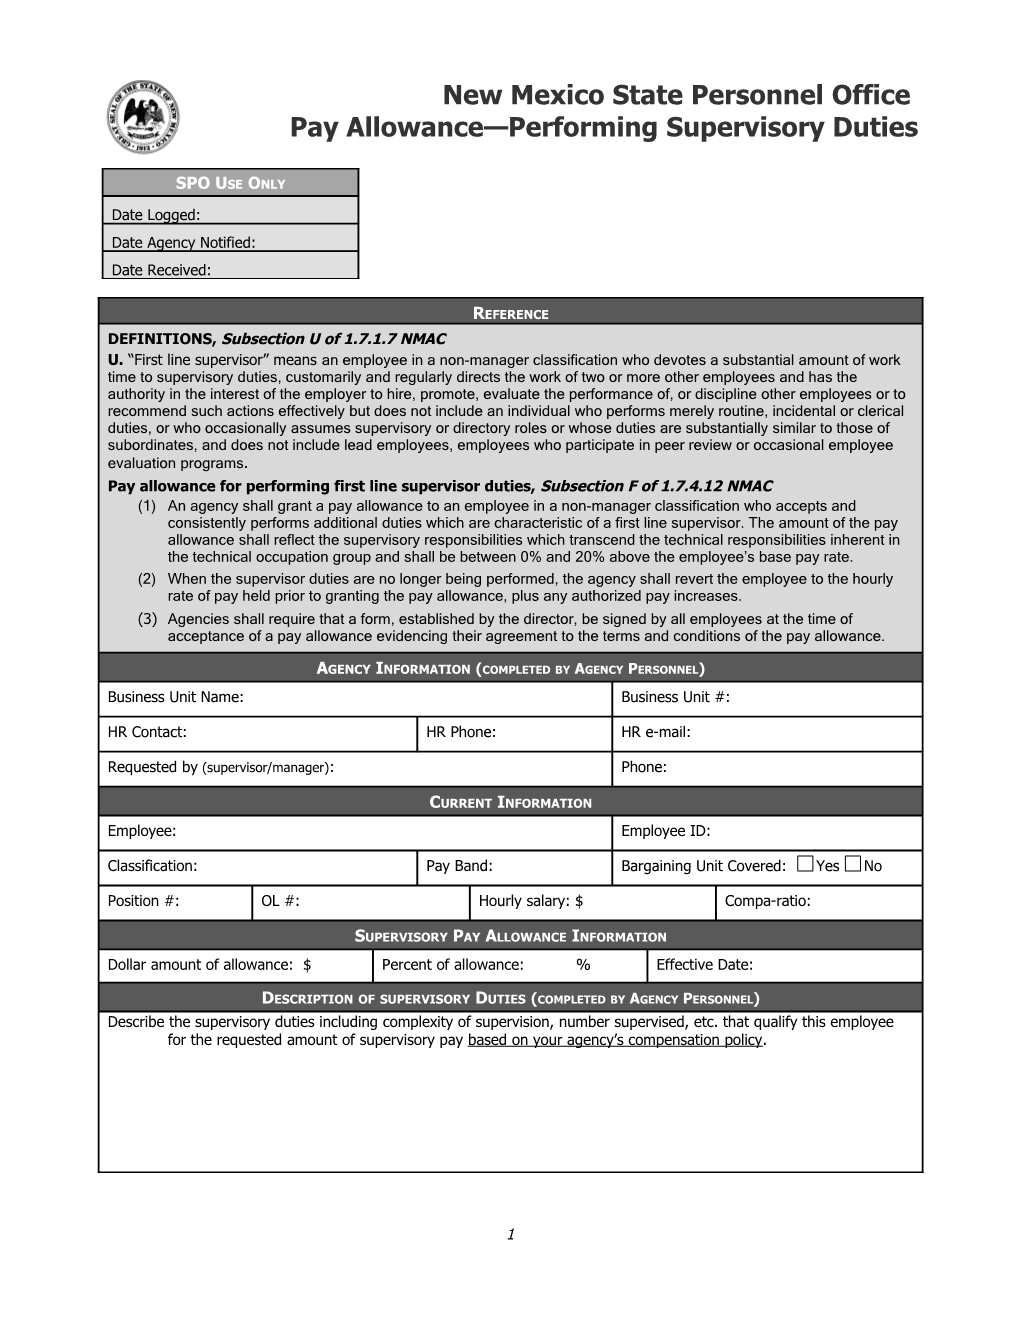 New Mexico State Personnel Officepay Allowance Performing Supervisory Duties